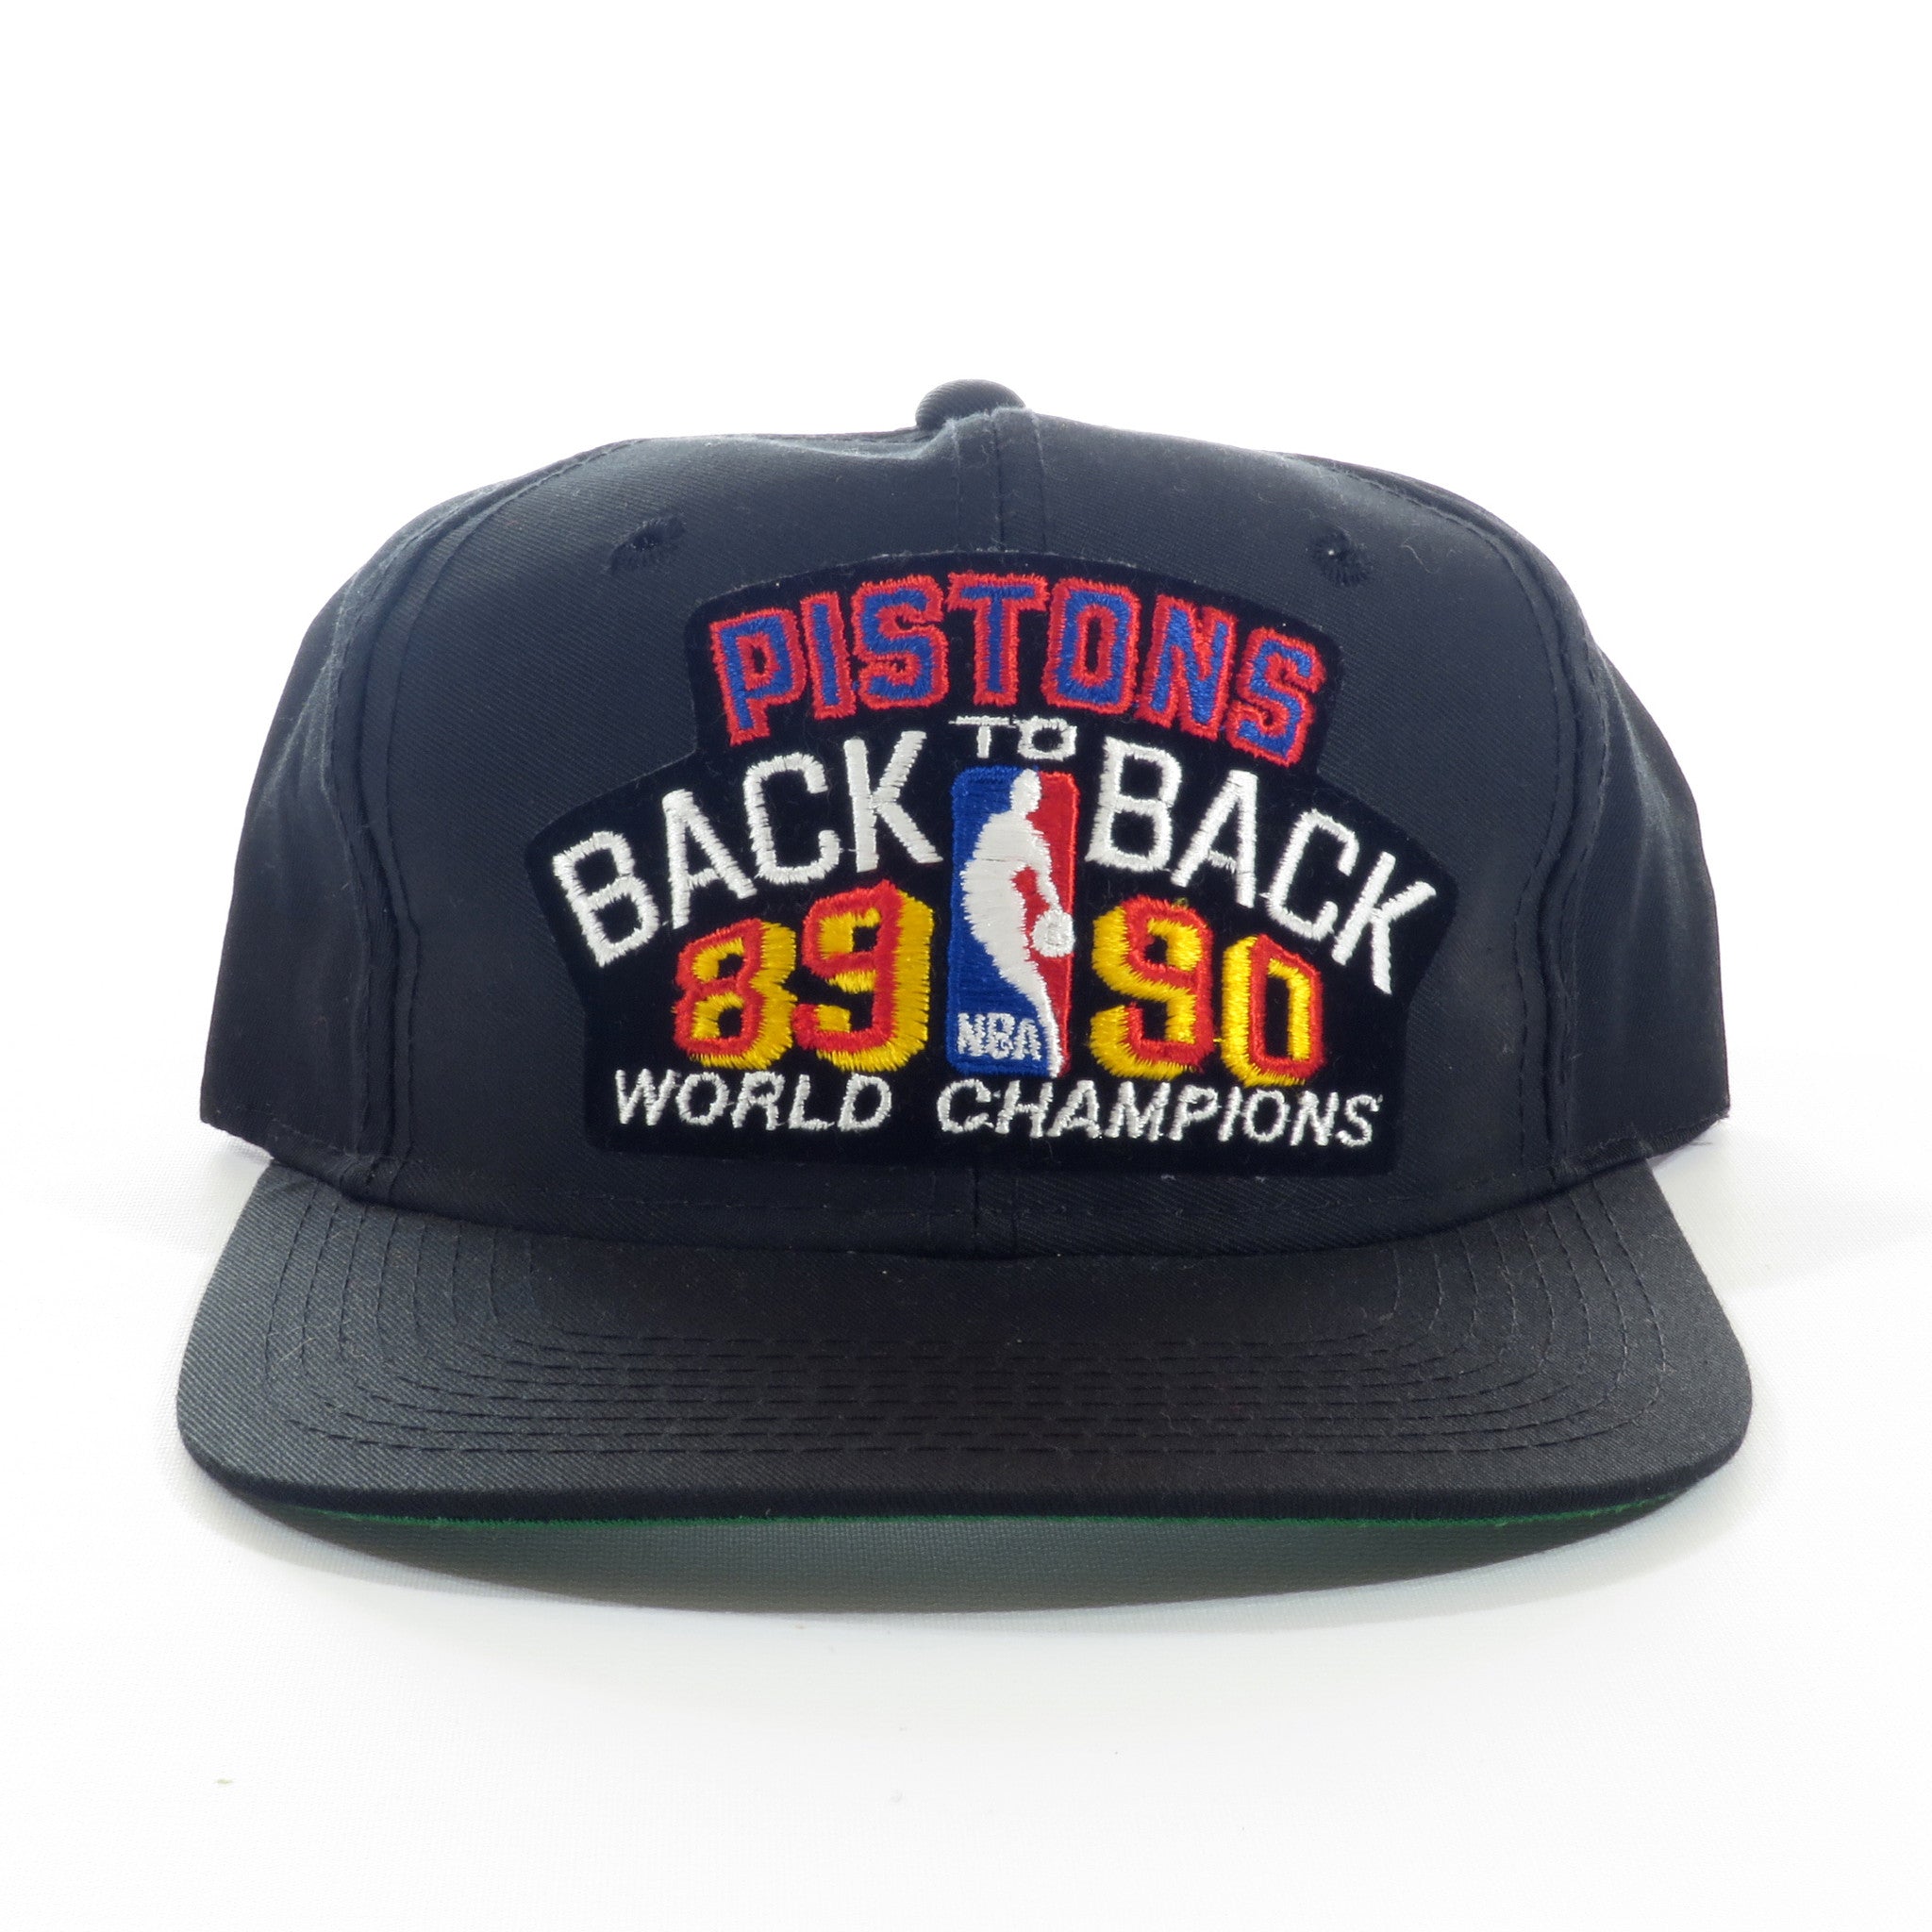 Detroit Pistons Sports Specialties 89-90 Back to Back Champions Snapback Hat